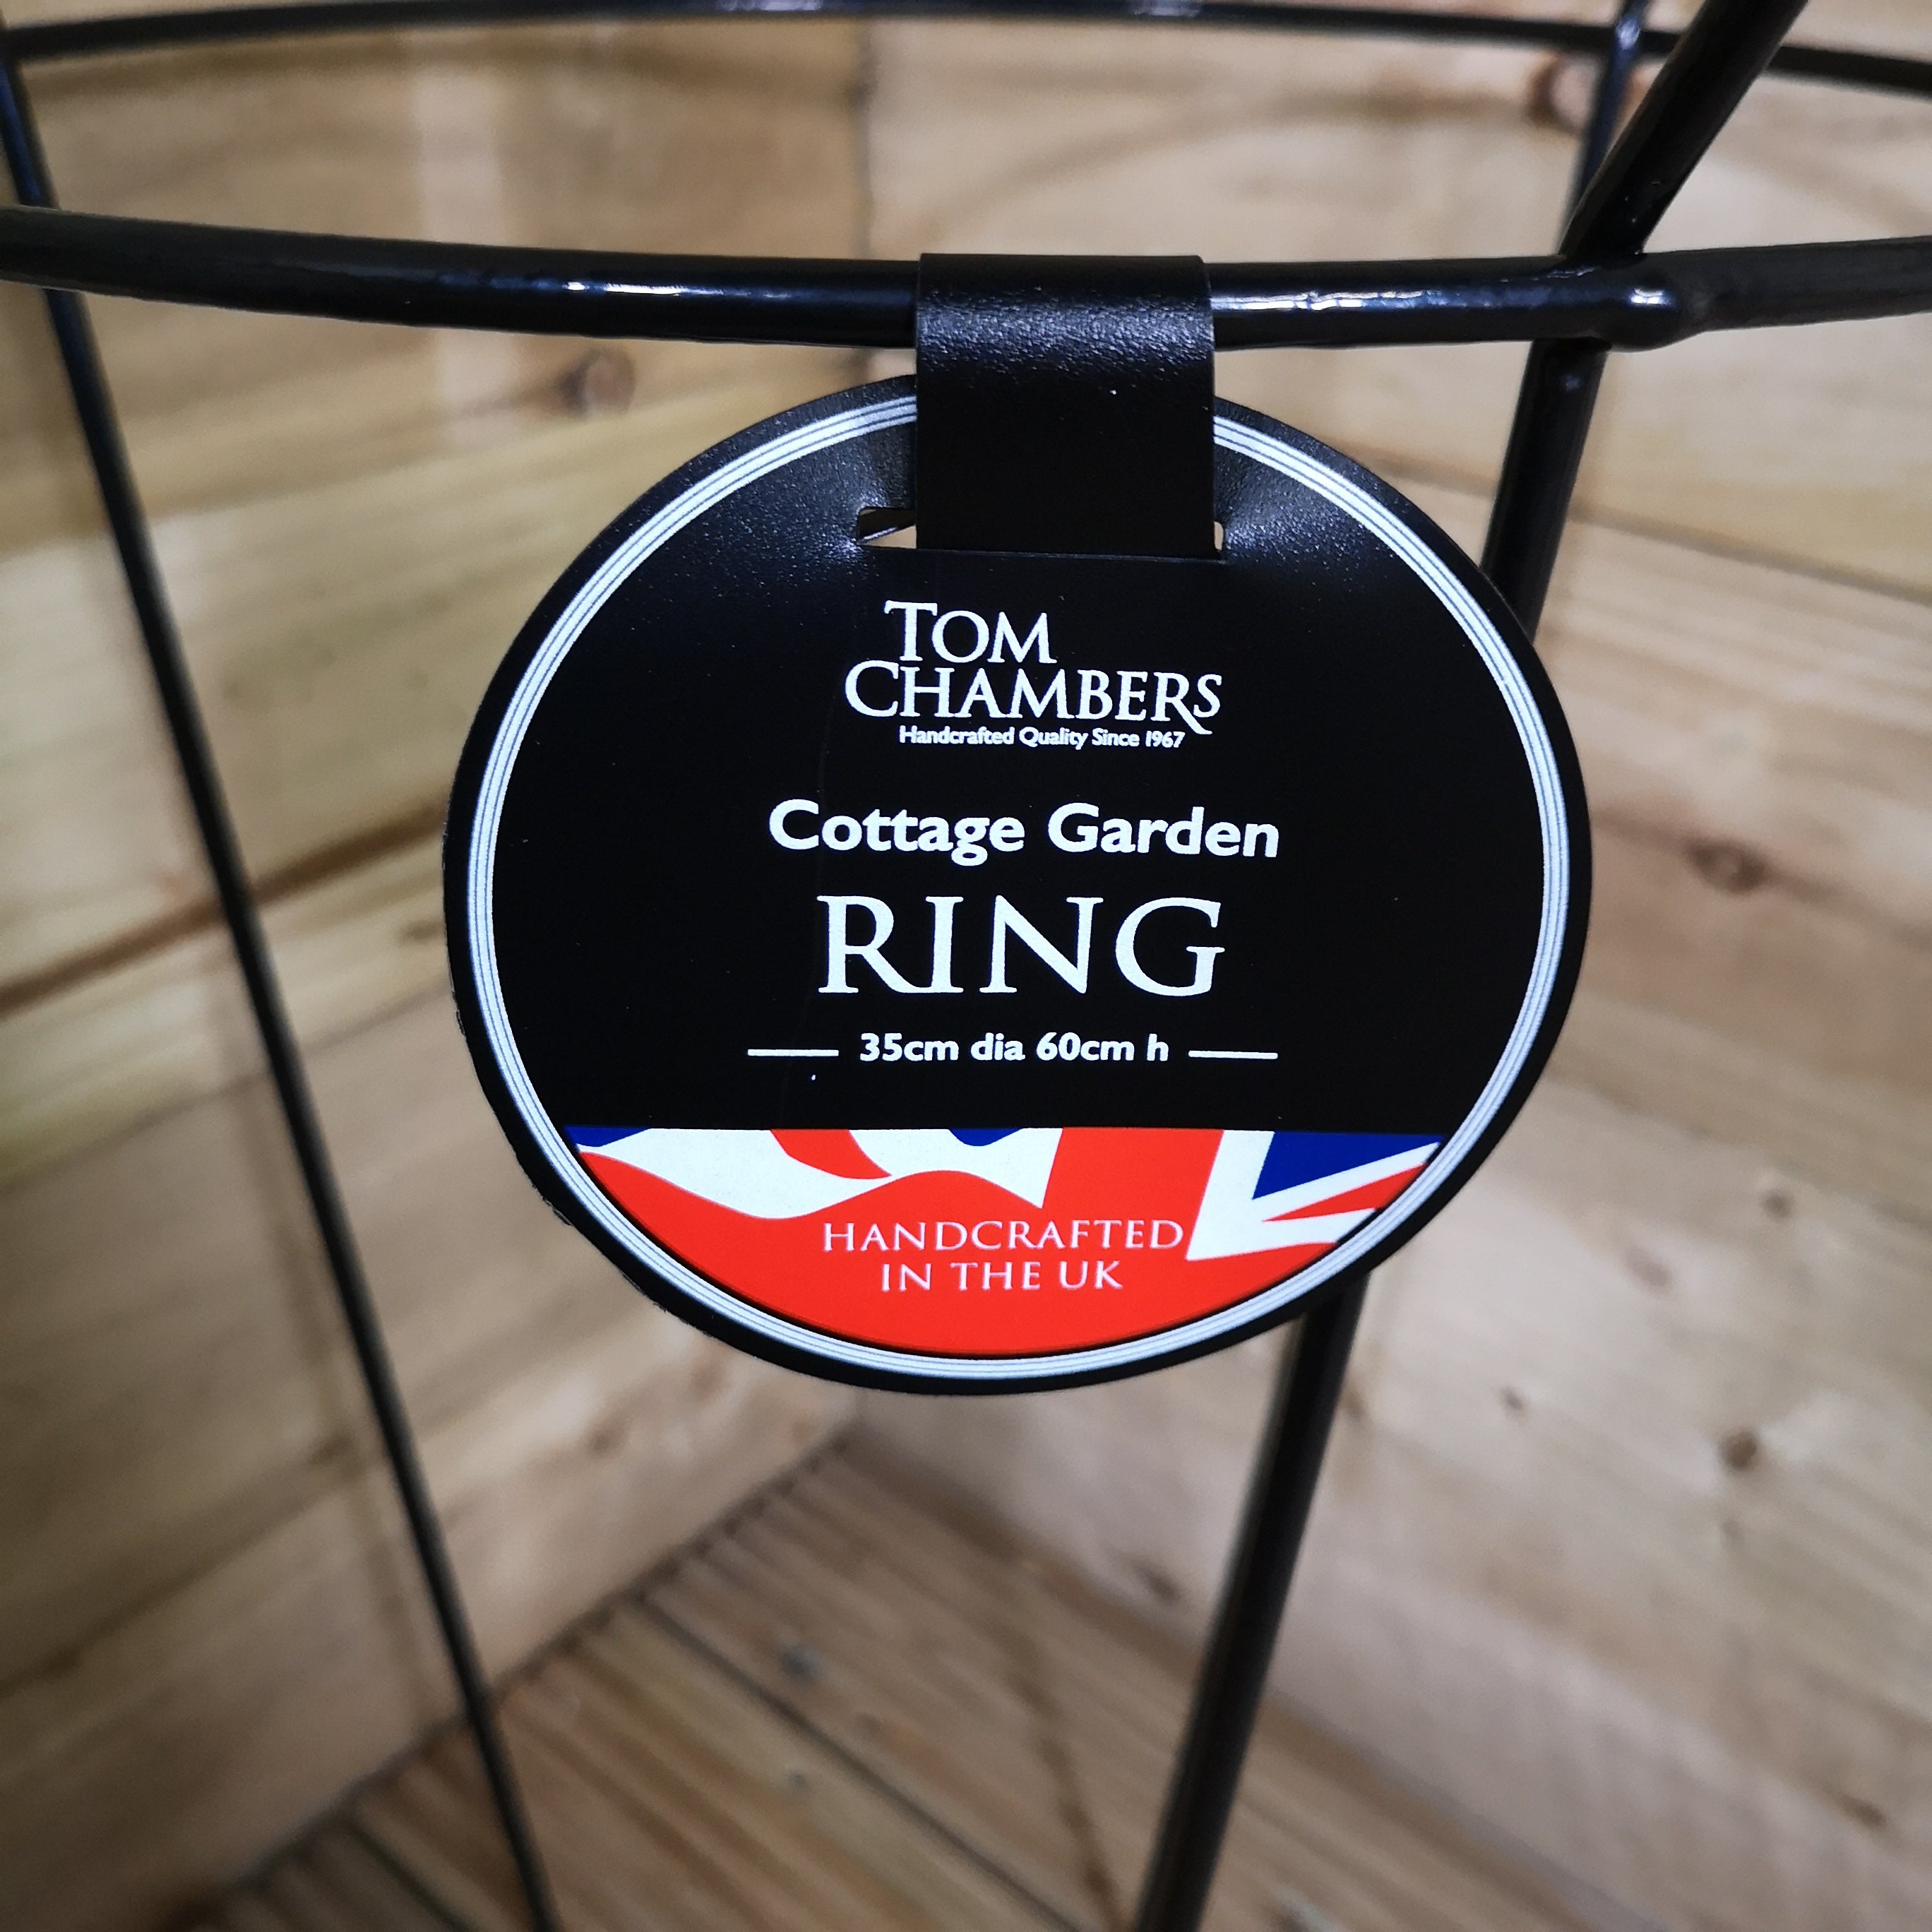 2 Pack of Tom Chambers Cottage Heavy Duty Black Metal Steel Herbaceous Garden Plant Support Ring 60cm x 35cm